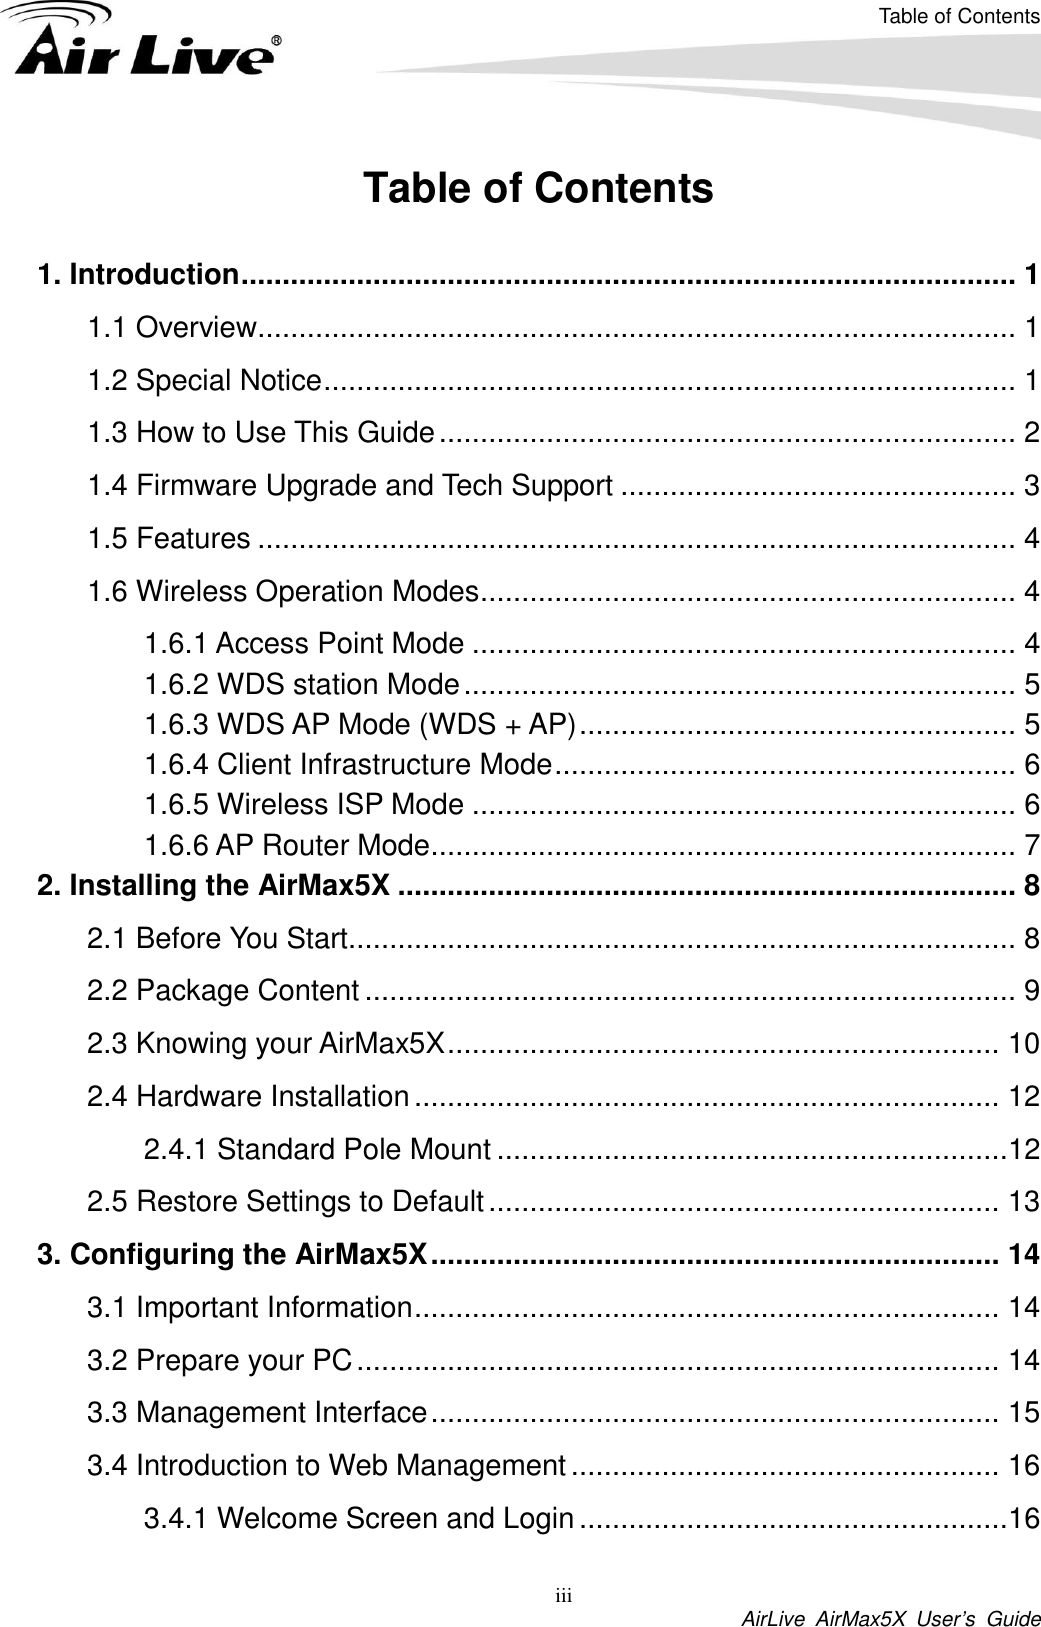 Table of Contents iii AirLive  AirMax5X  User’s  Guide Table of Contents  1. Introduction .............................................................................................. 1 1.1 Overview............................................................................................ 1 1.2 Special Notice .................................................................................... 1 1.3 How to Use This Guide ...................................................................... 2 1.4 Firmware Upgrade and Tech Support ................................................ 3 1.5 Features ............................................................................................ 4 1.6 Wireless Operation Modes ................................................................. 4 1.6.1 Access Point Mode .................................................................. 4 1.6.2 WDS station Mode ................................................................... 5 1.6.3 WDS AP Mode (WDS + AP) ..................................................... 5 1.6.4 Client Infrastructure Mode ........................................................ 6 1.6.5 Wireless ISP Mode .................................................................. 6 1.6.6 AP Router Mode ....................................................................... 7 2. Installing the AirMax5X ........................................................................... 8 2.1 Before You Start................................................................................. 8 2.2 Package Content ............................................................................... 9 2.3 Knowing your AirMax5X ................................................................... 10 2.4 Hardware Installation ....................................................................... 12 2.4.1 Standard Pole Mount ..............................................................12 2.5 Restore Settings to Default .............................................................. 13 3. Configuring the AirMax5X ..................................................................... 14 3.1 Important Information ....................................................................... 14 3.2 Prepare your PC .............................................................................. 14 3.3 Management Interface ..................................................................... 15 3.4 Introduction to Web Management .................................................... 16 3.4.1 Welcome Screen and Login ....................................................16 